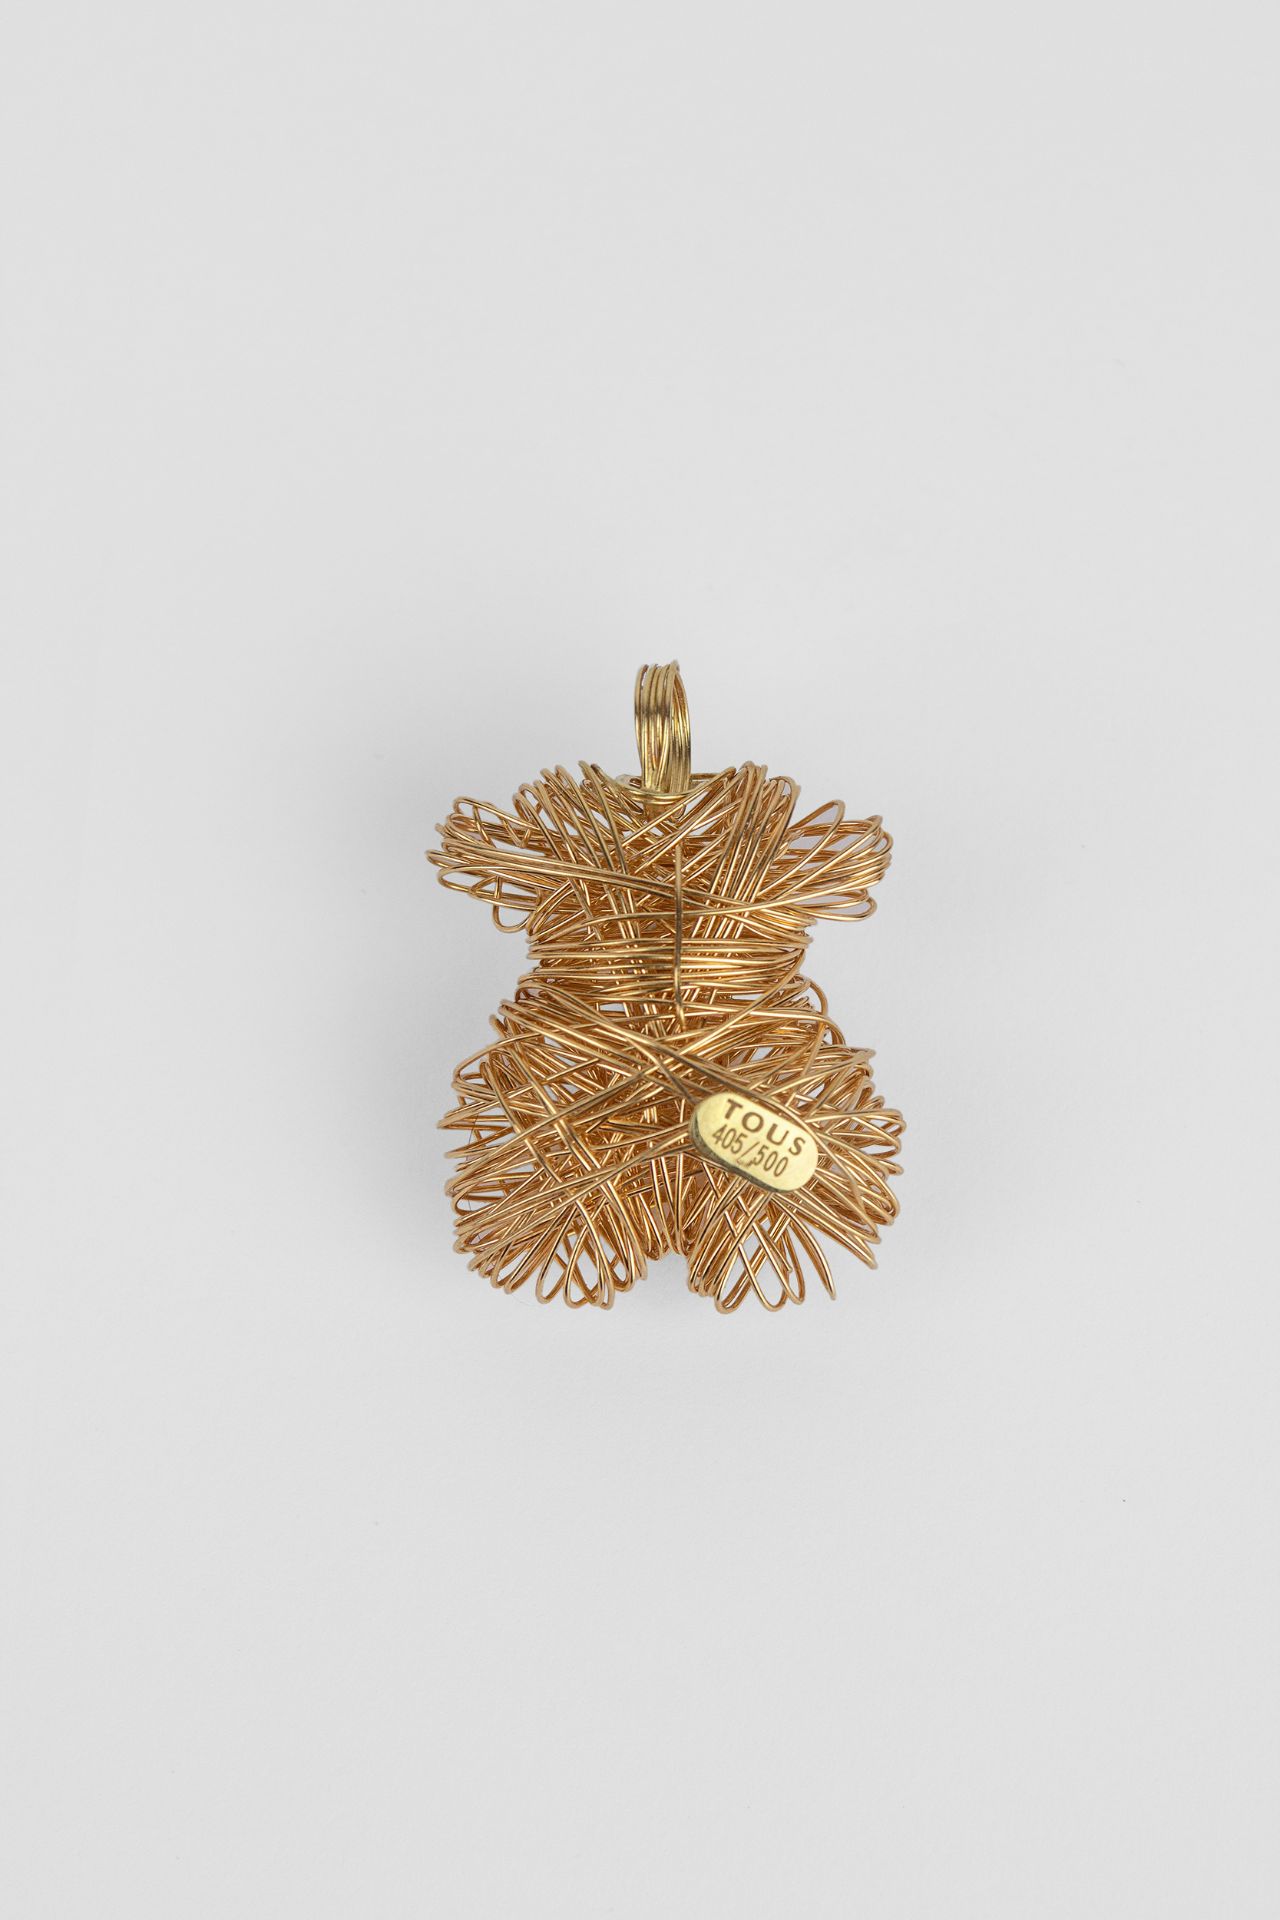 Tous. An 18k., yellow gold limited edition pendant - Image 2 of 2